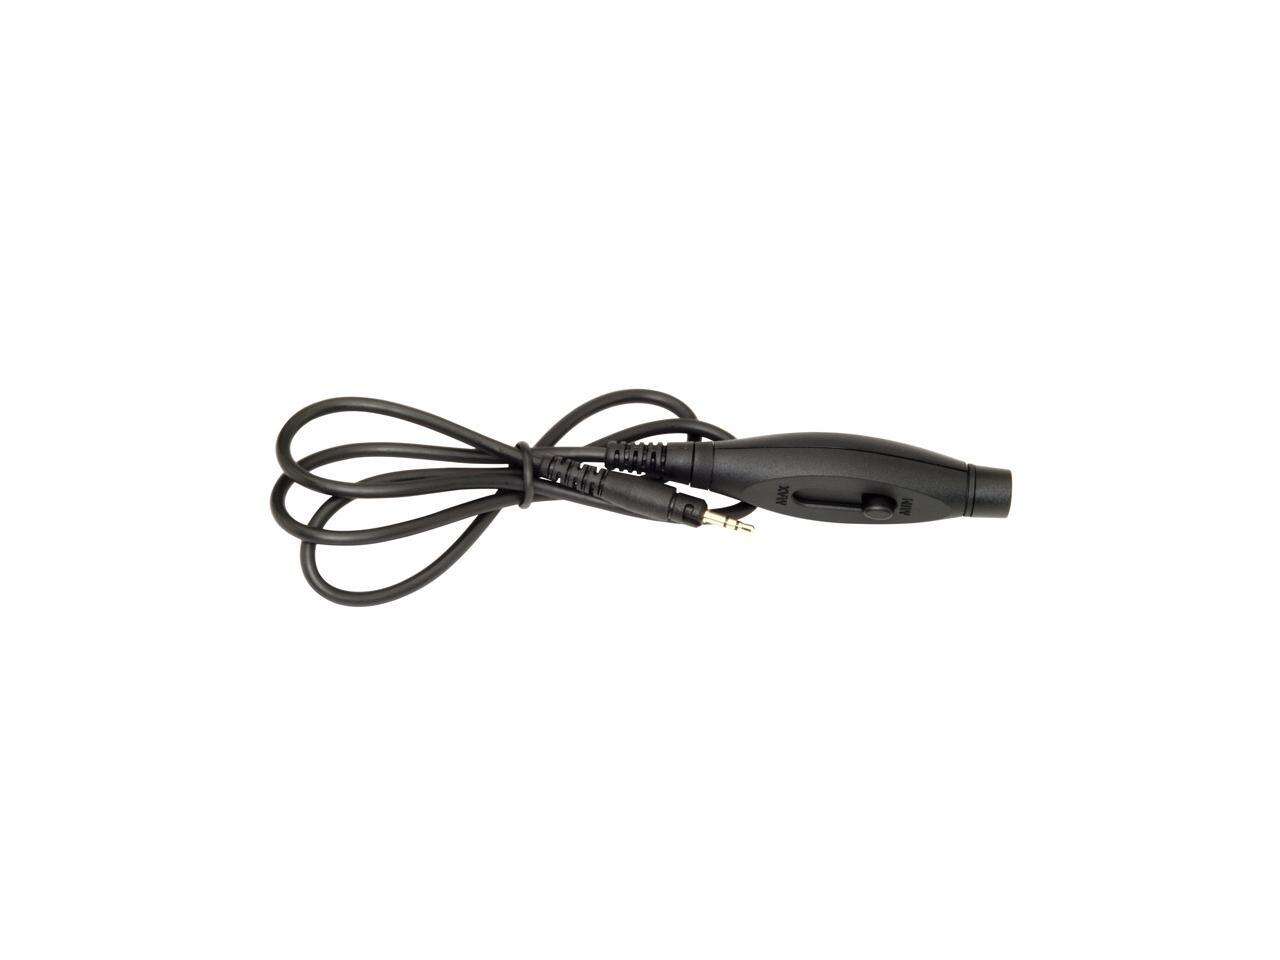 KRK In-Line Volume Control KNS Headphone Cable